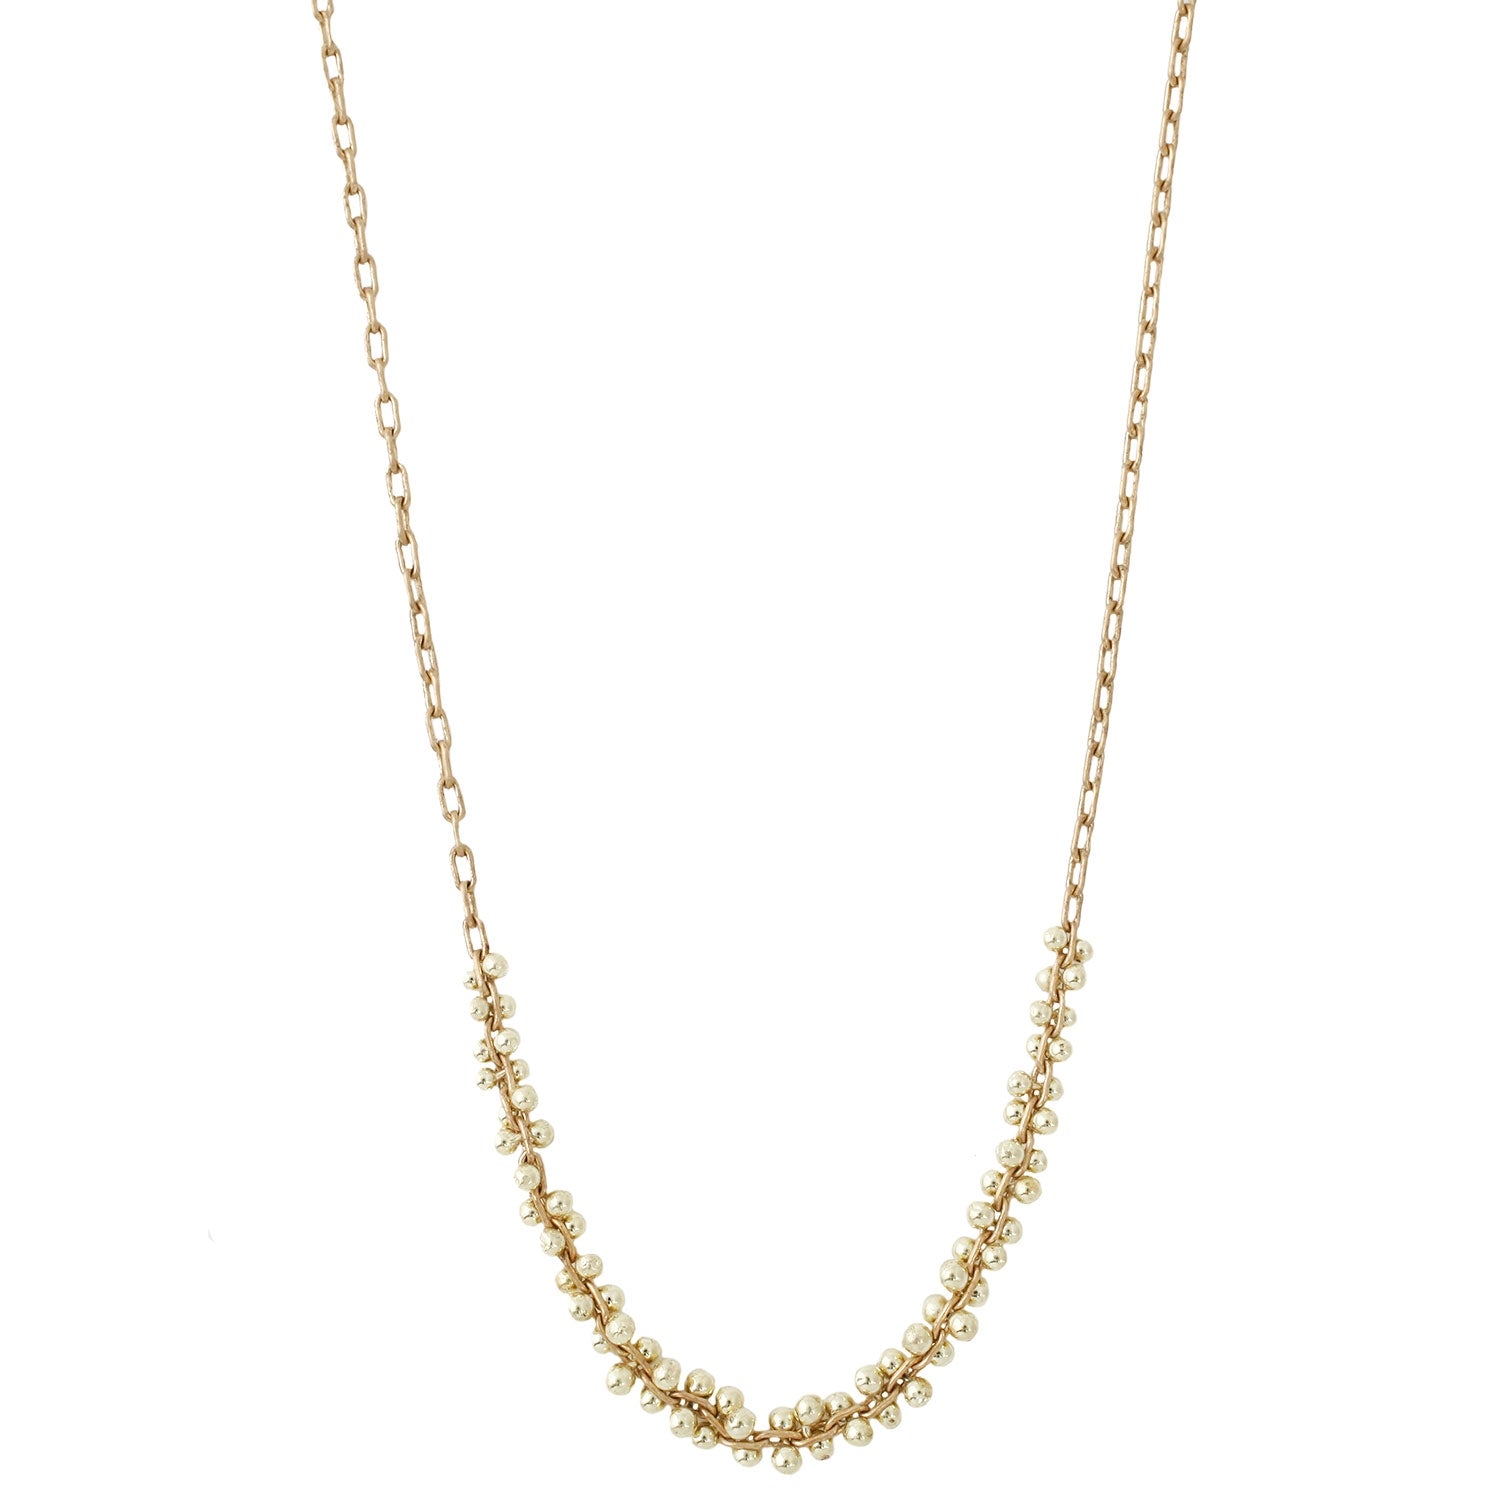 TenThousandThings 18k Gold Beaded Center Cluster Necklace